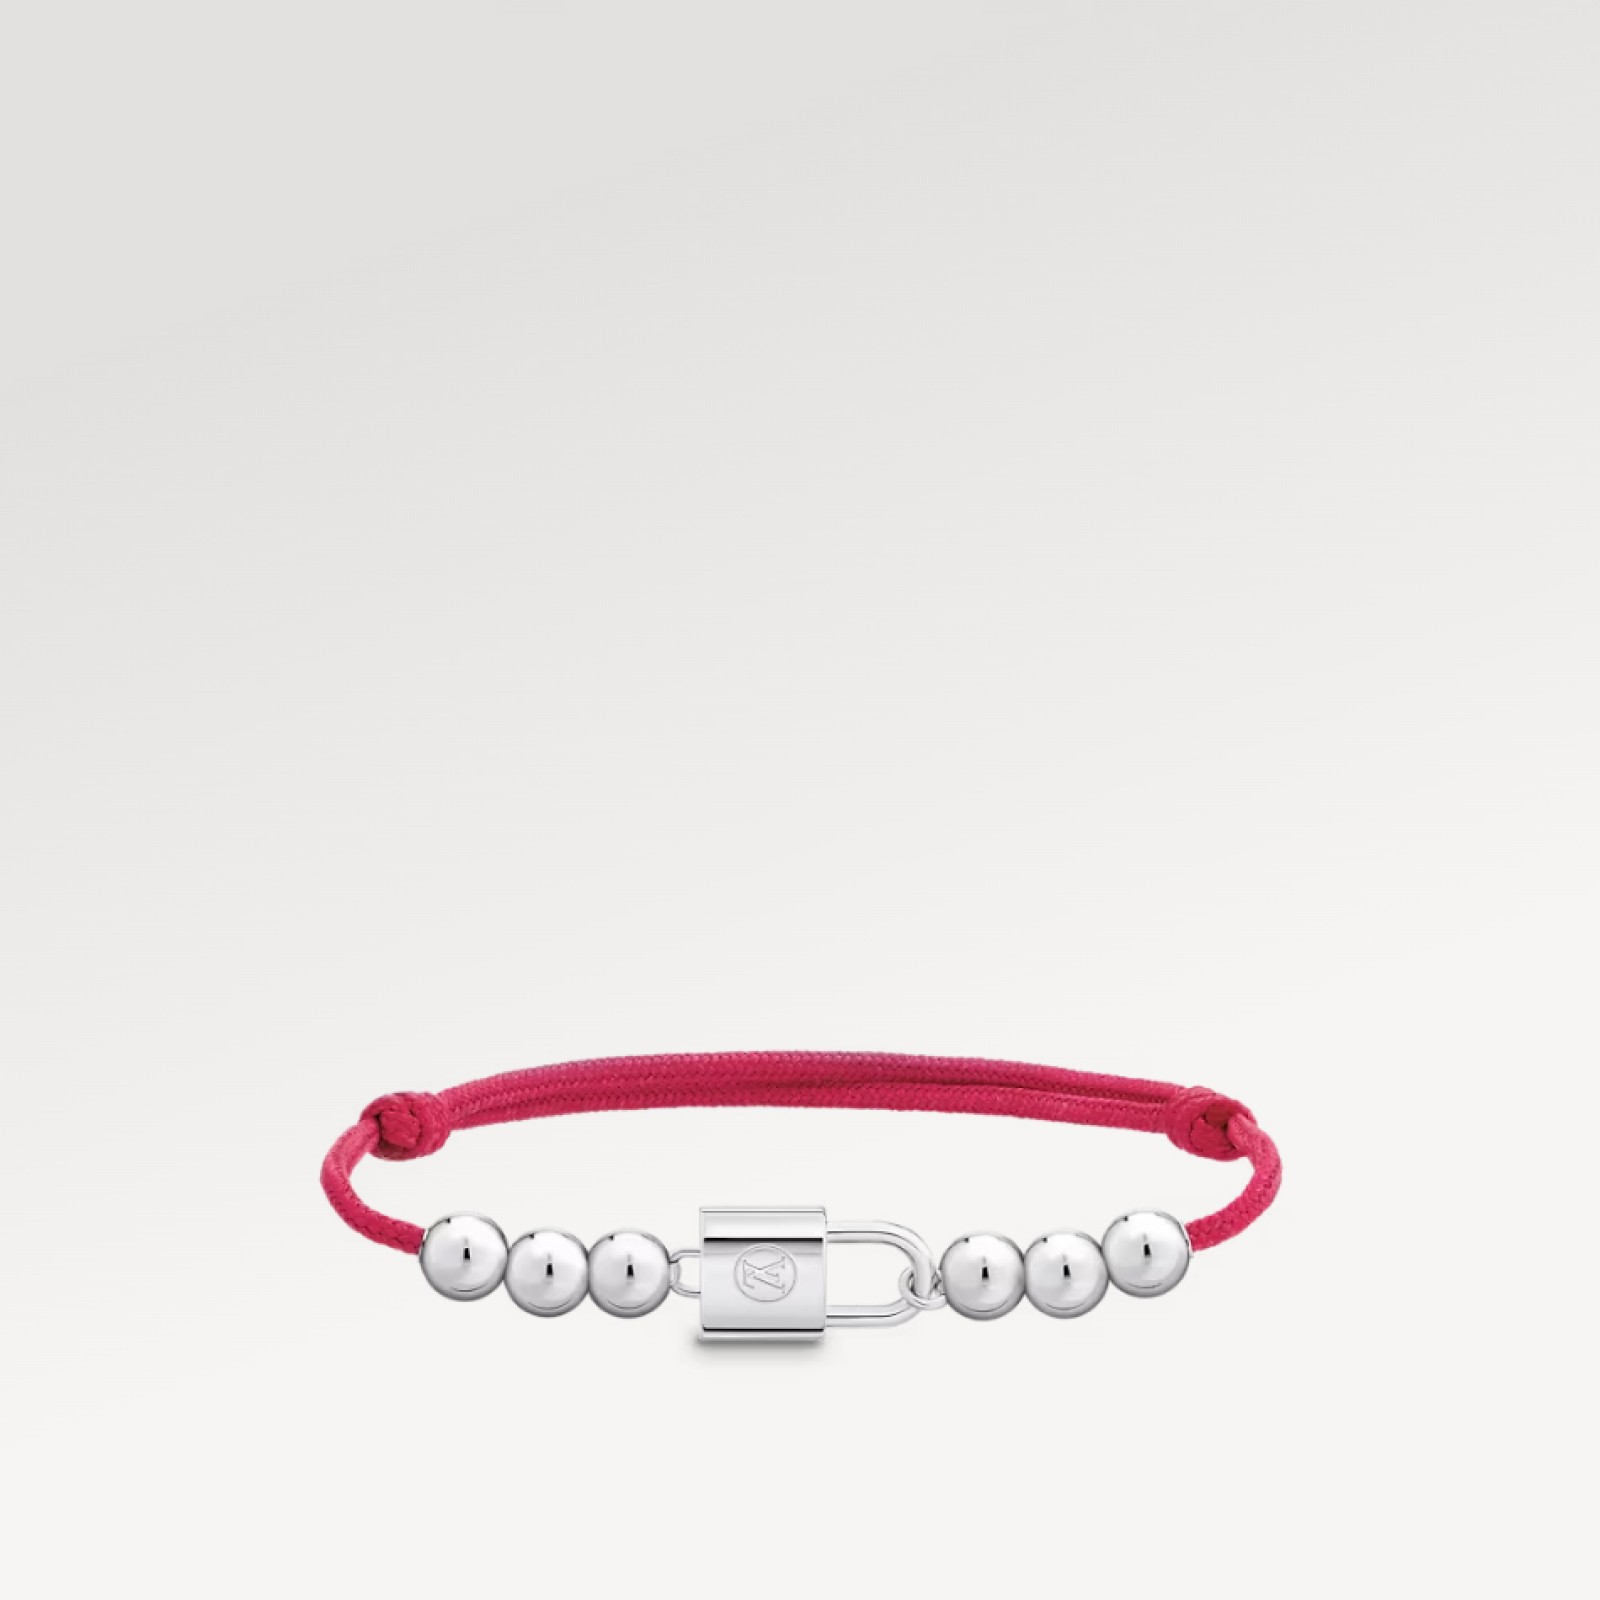 Silver Lockit Beads Bracelet, Silver and Red Polyester Cord